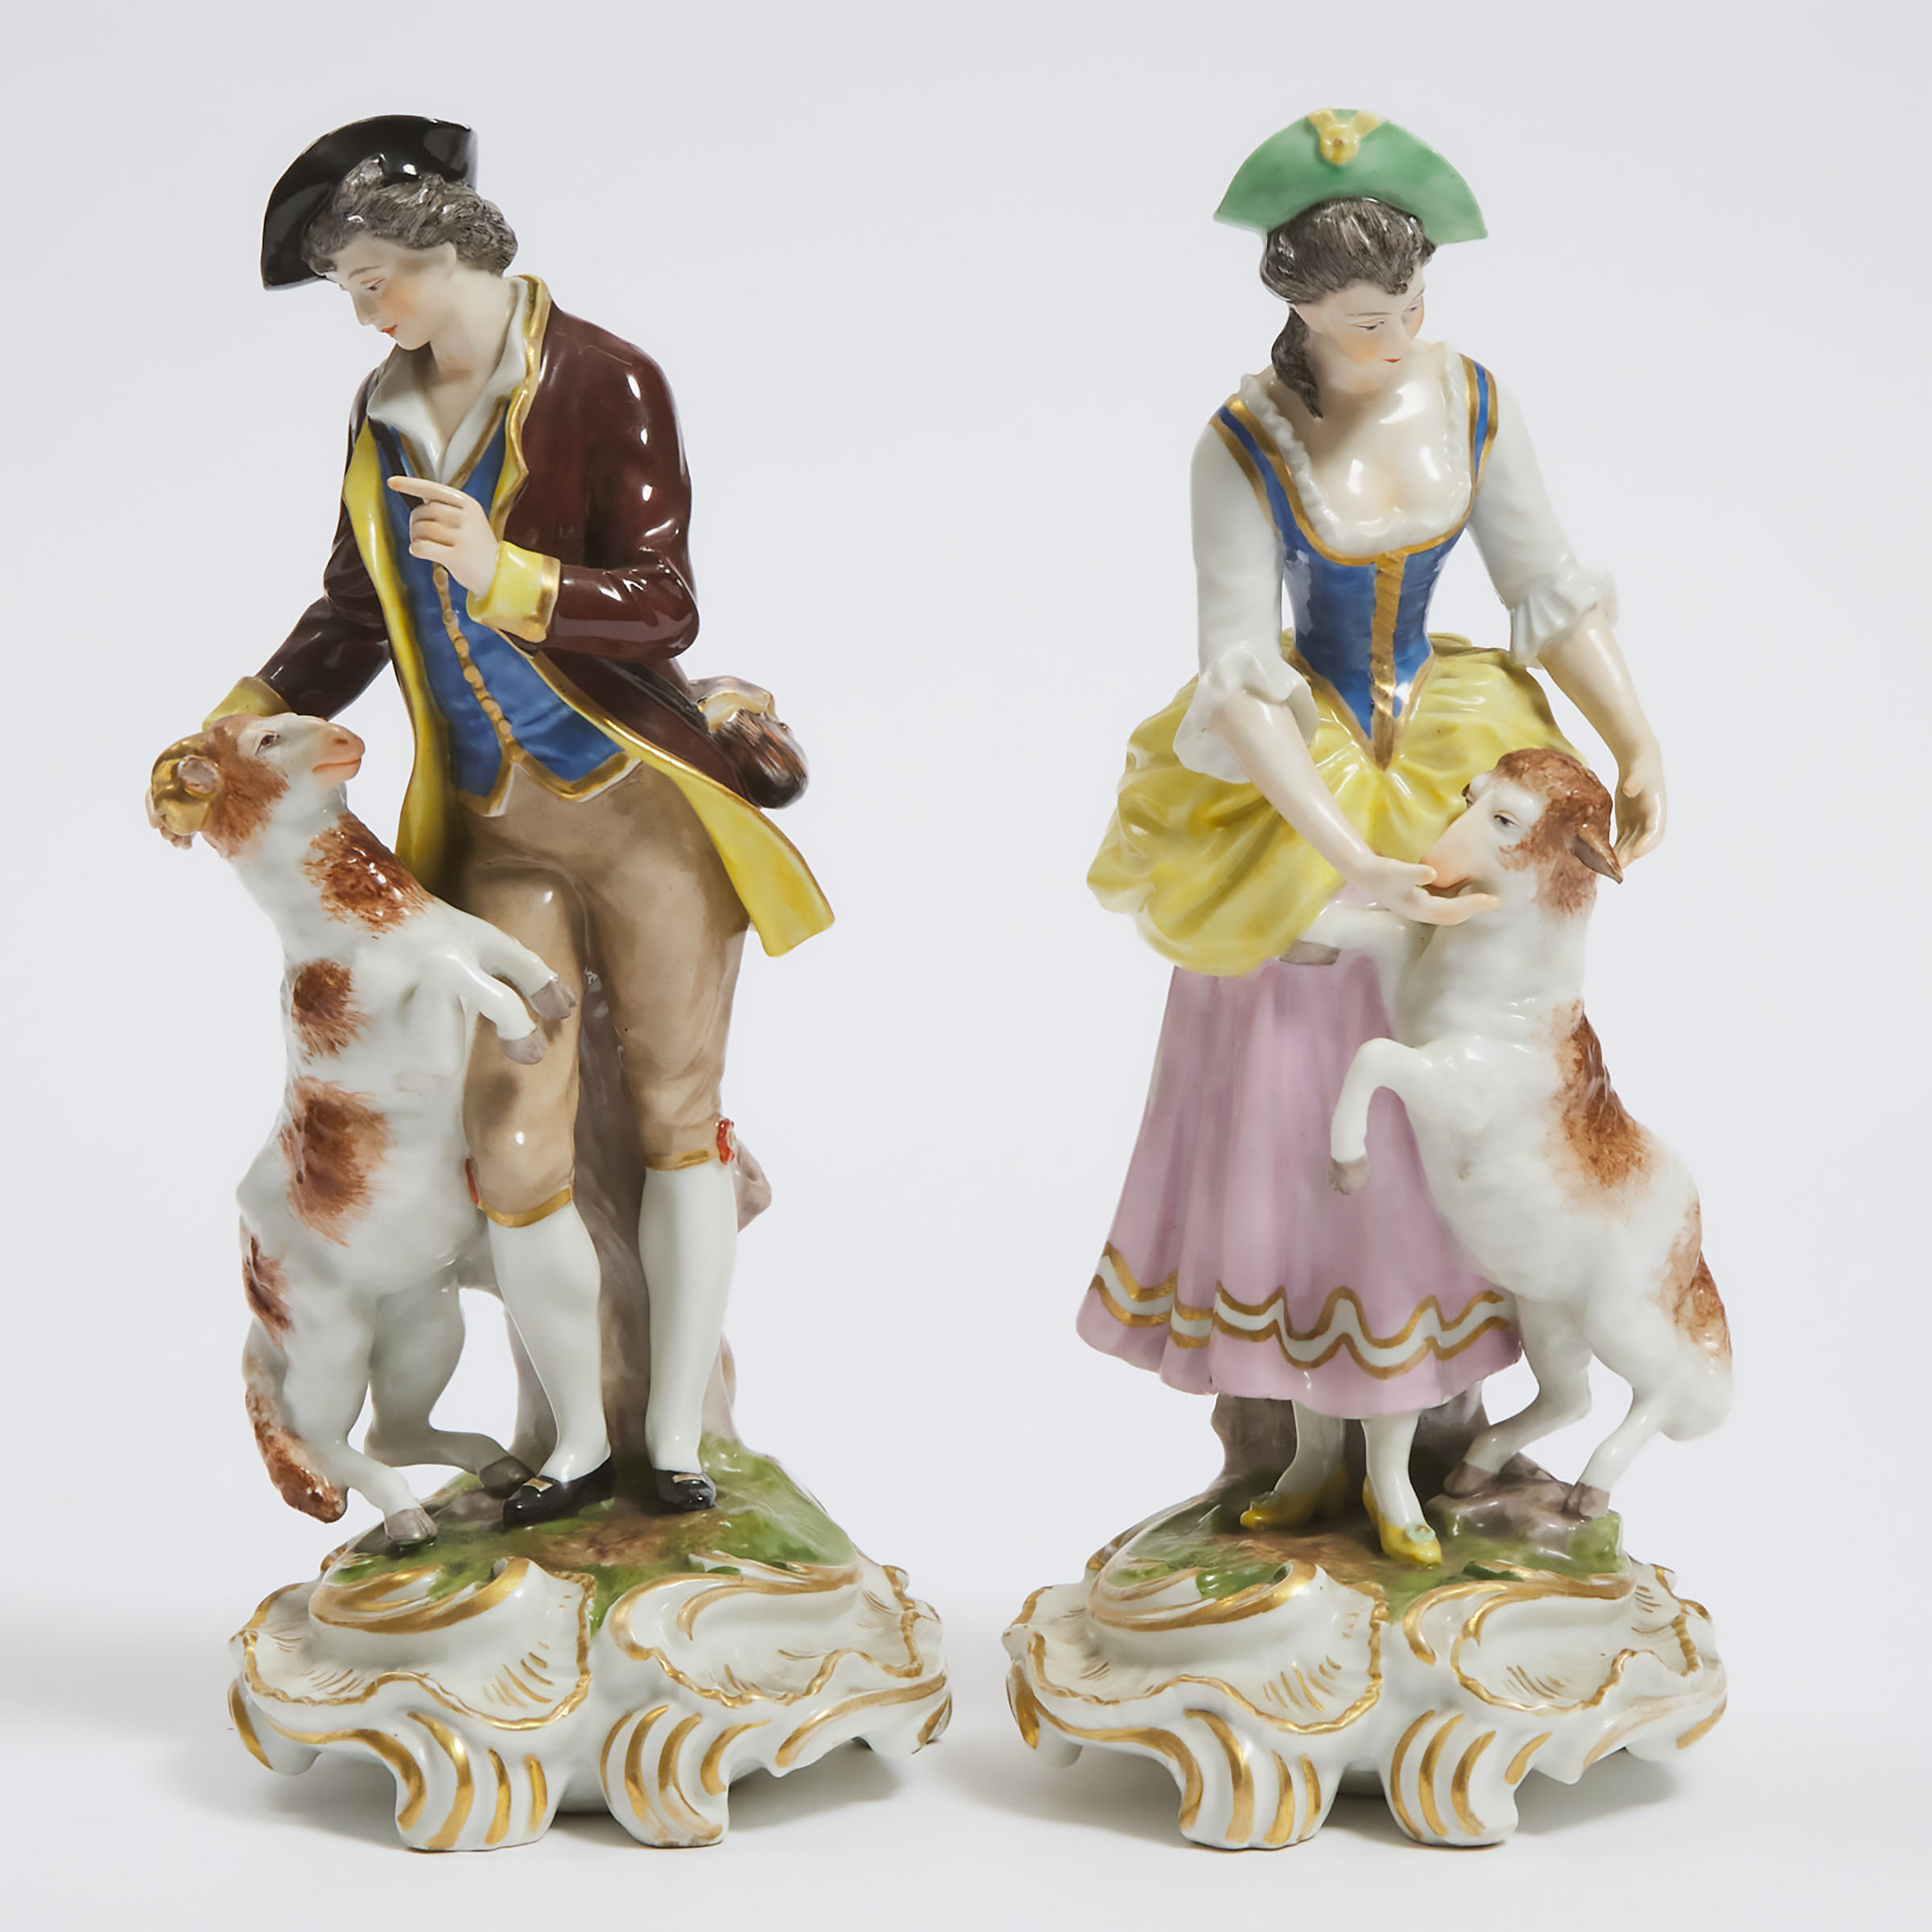 Pair of Vienna Figures of a Shepherd and Companion, late 19th/early 20th century